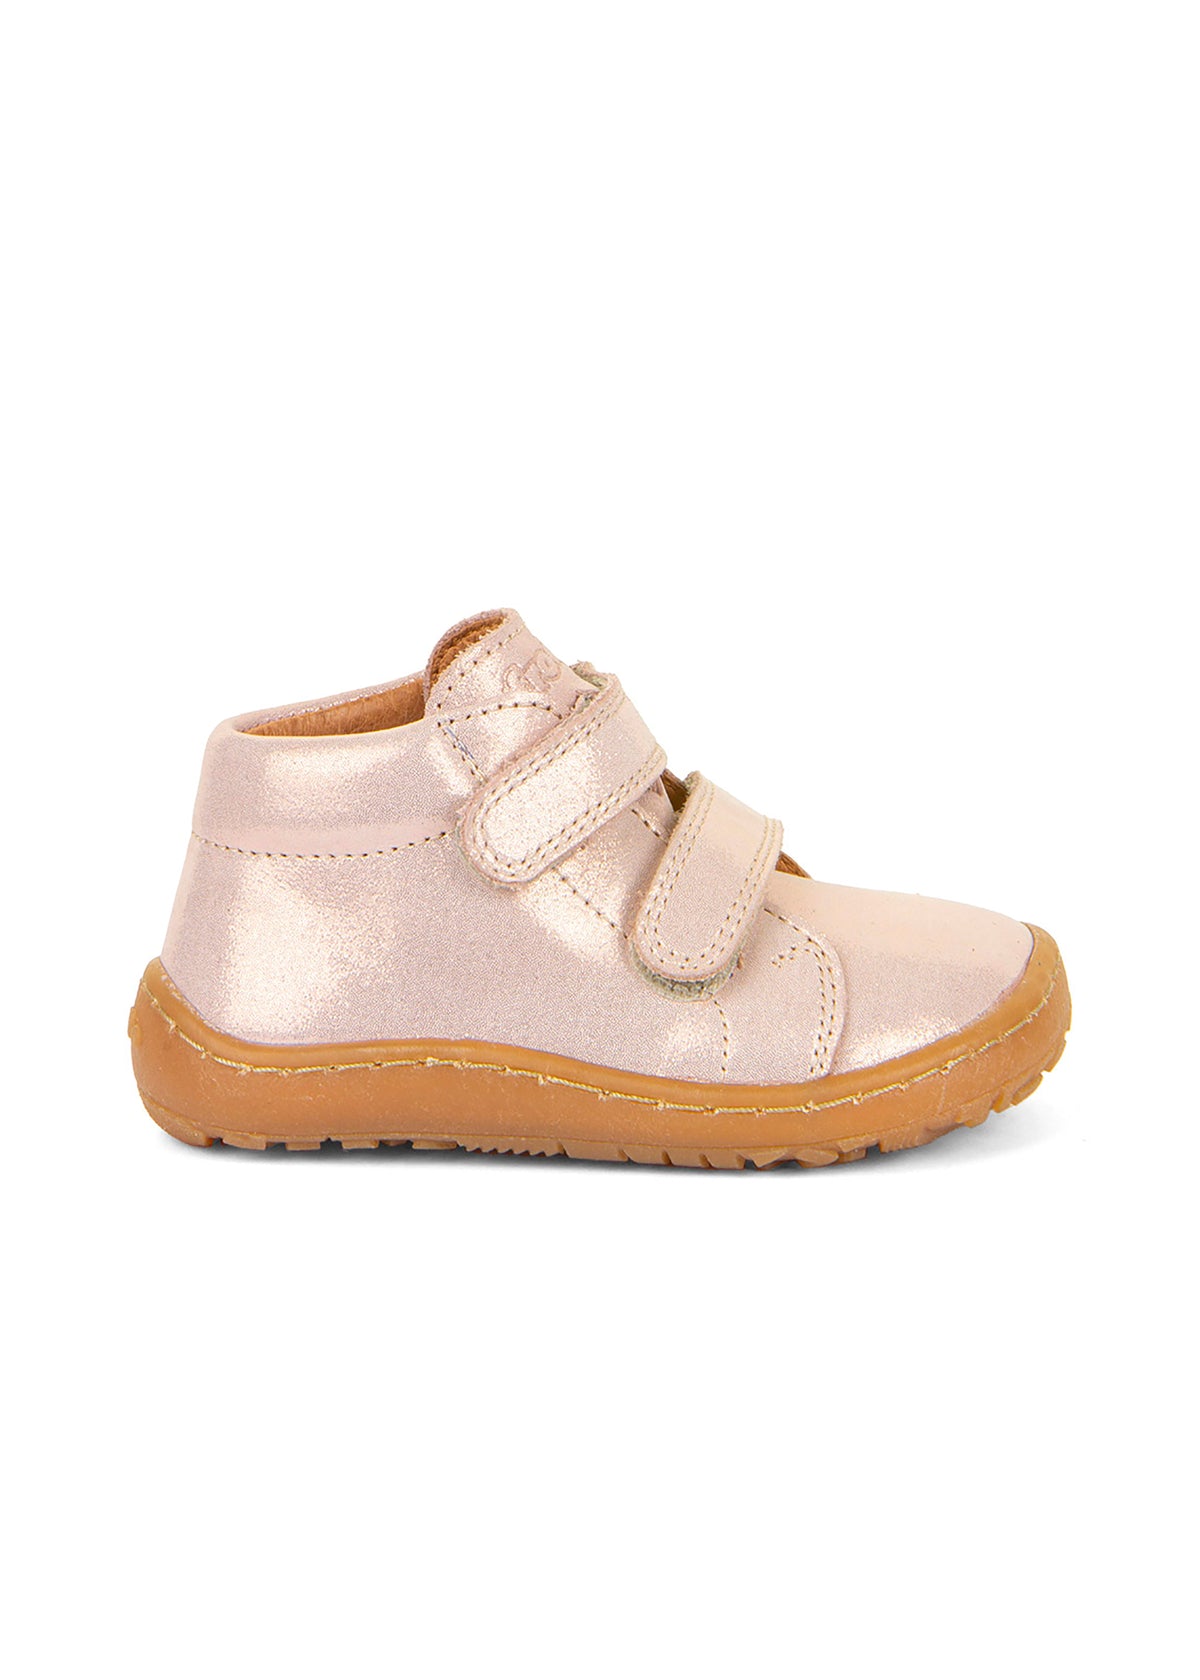 Children's barefoot shoes - shiny leather, light gold, Barefoot First Step